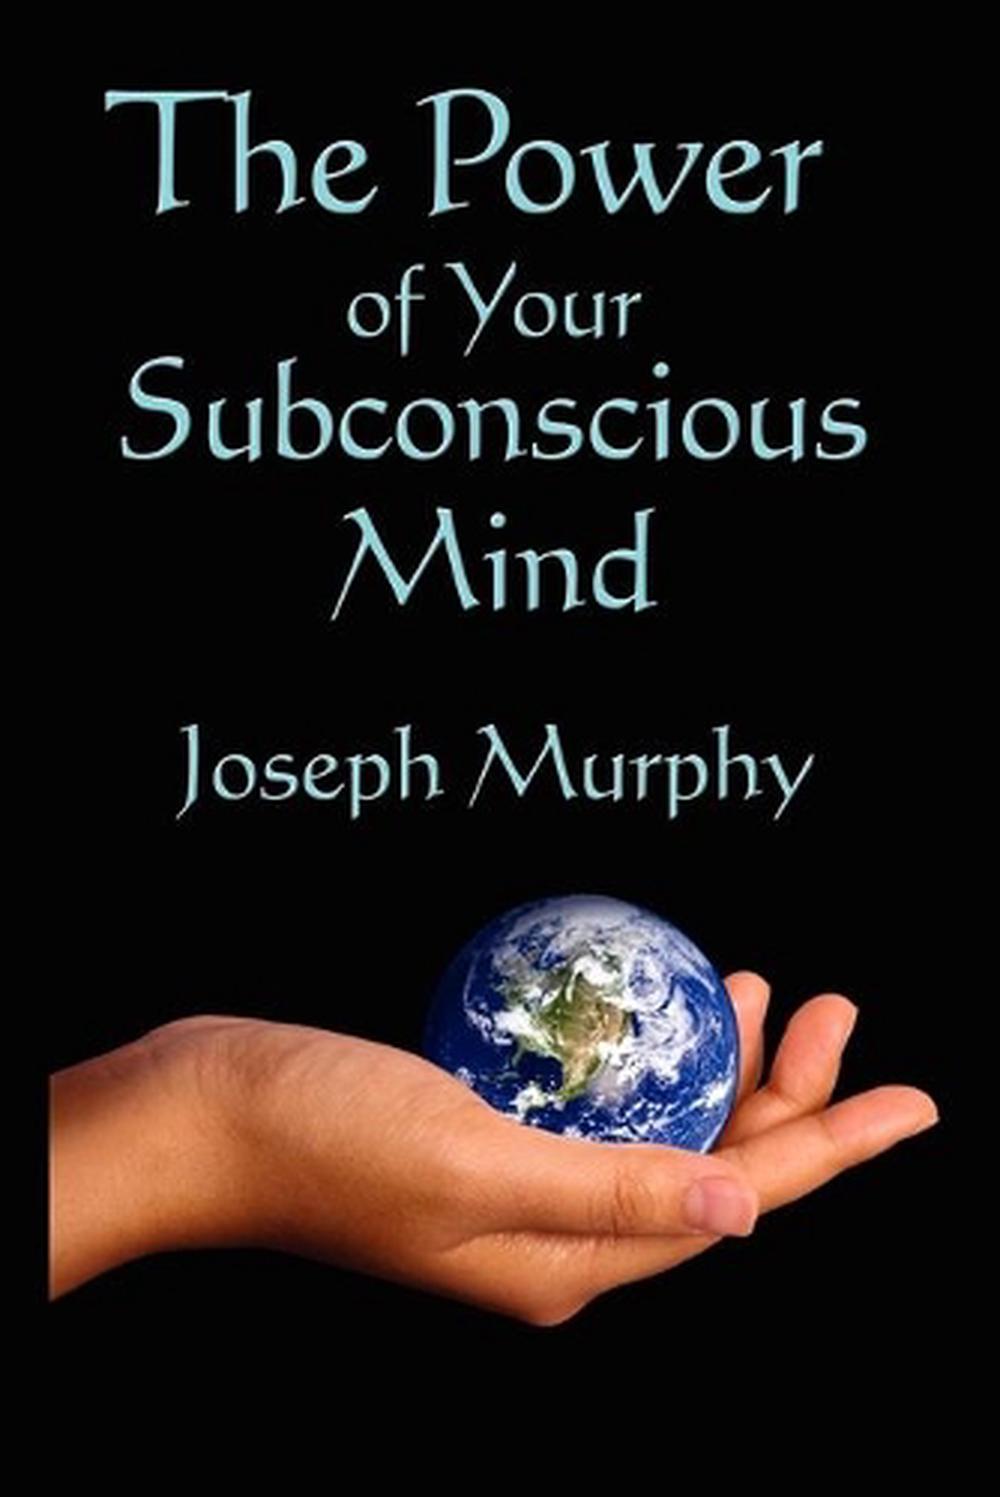 grow rich with the power of subconscious mind